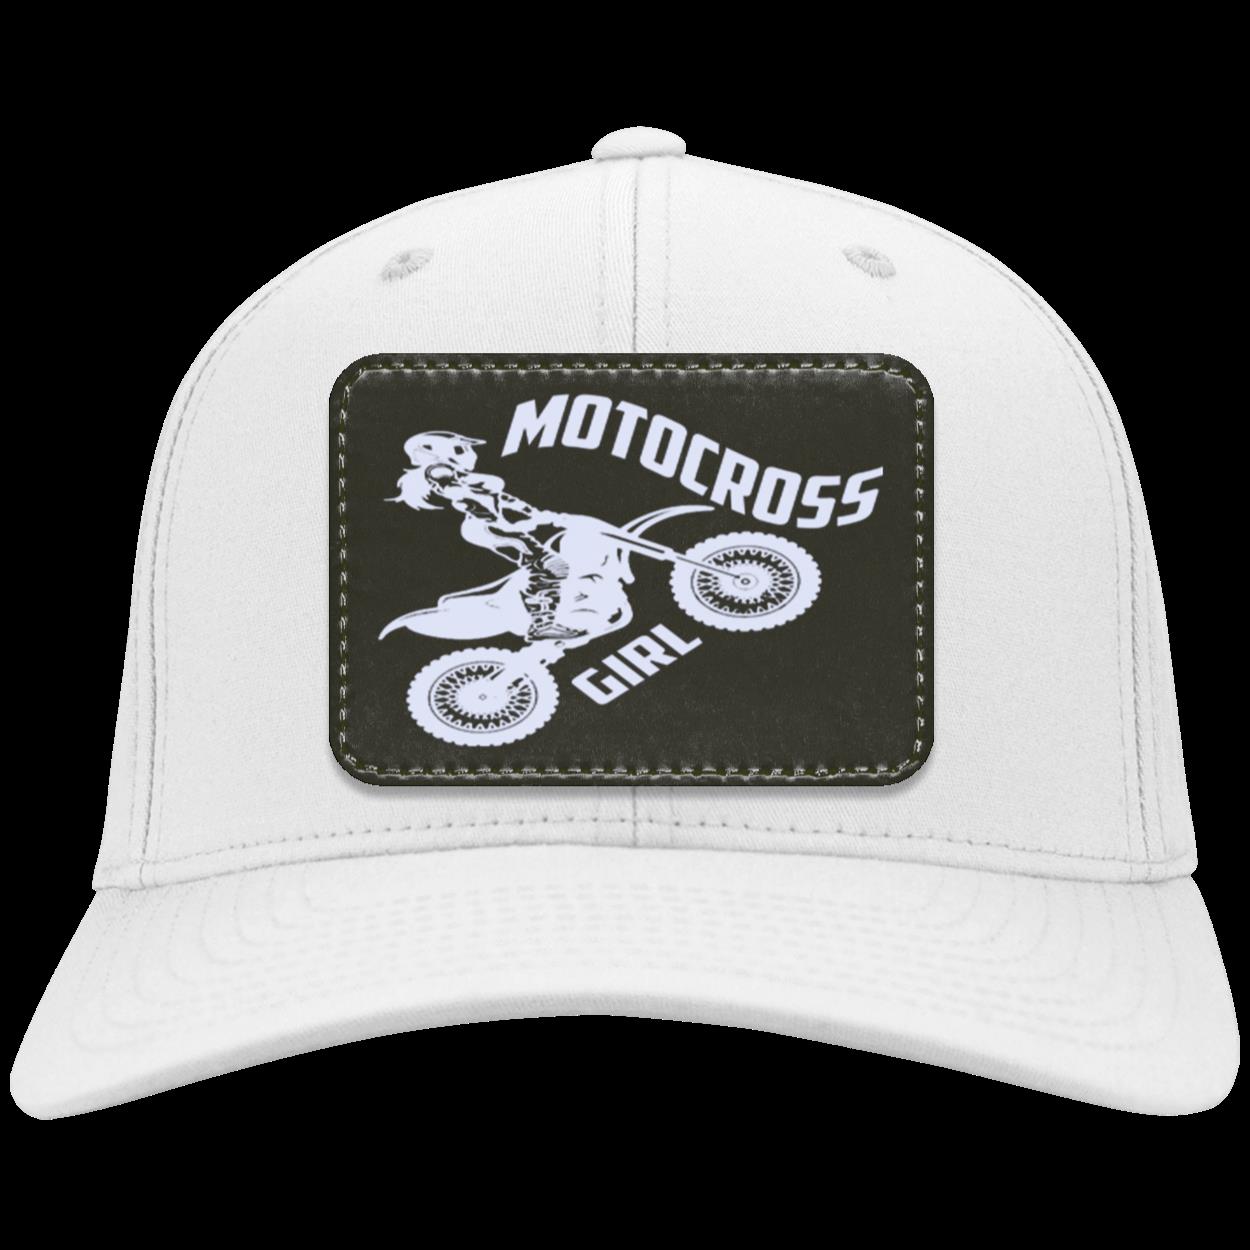 Motocross Girl Patched Twill Cap